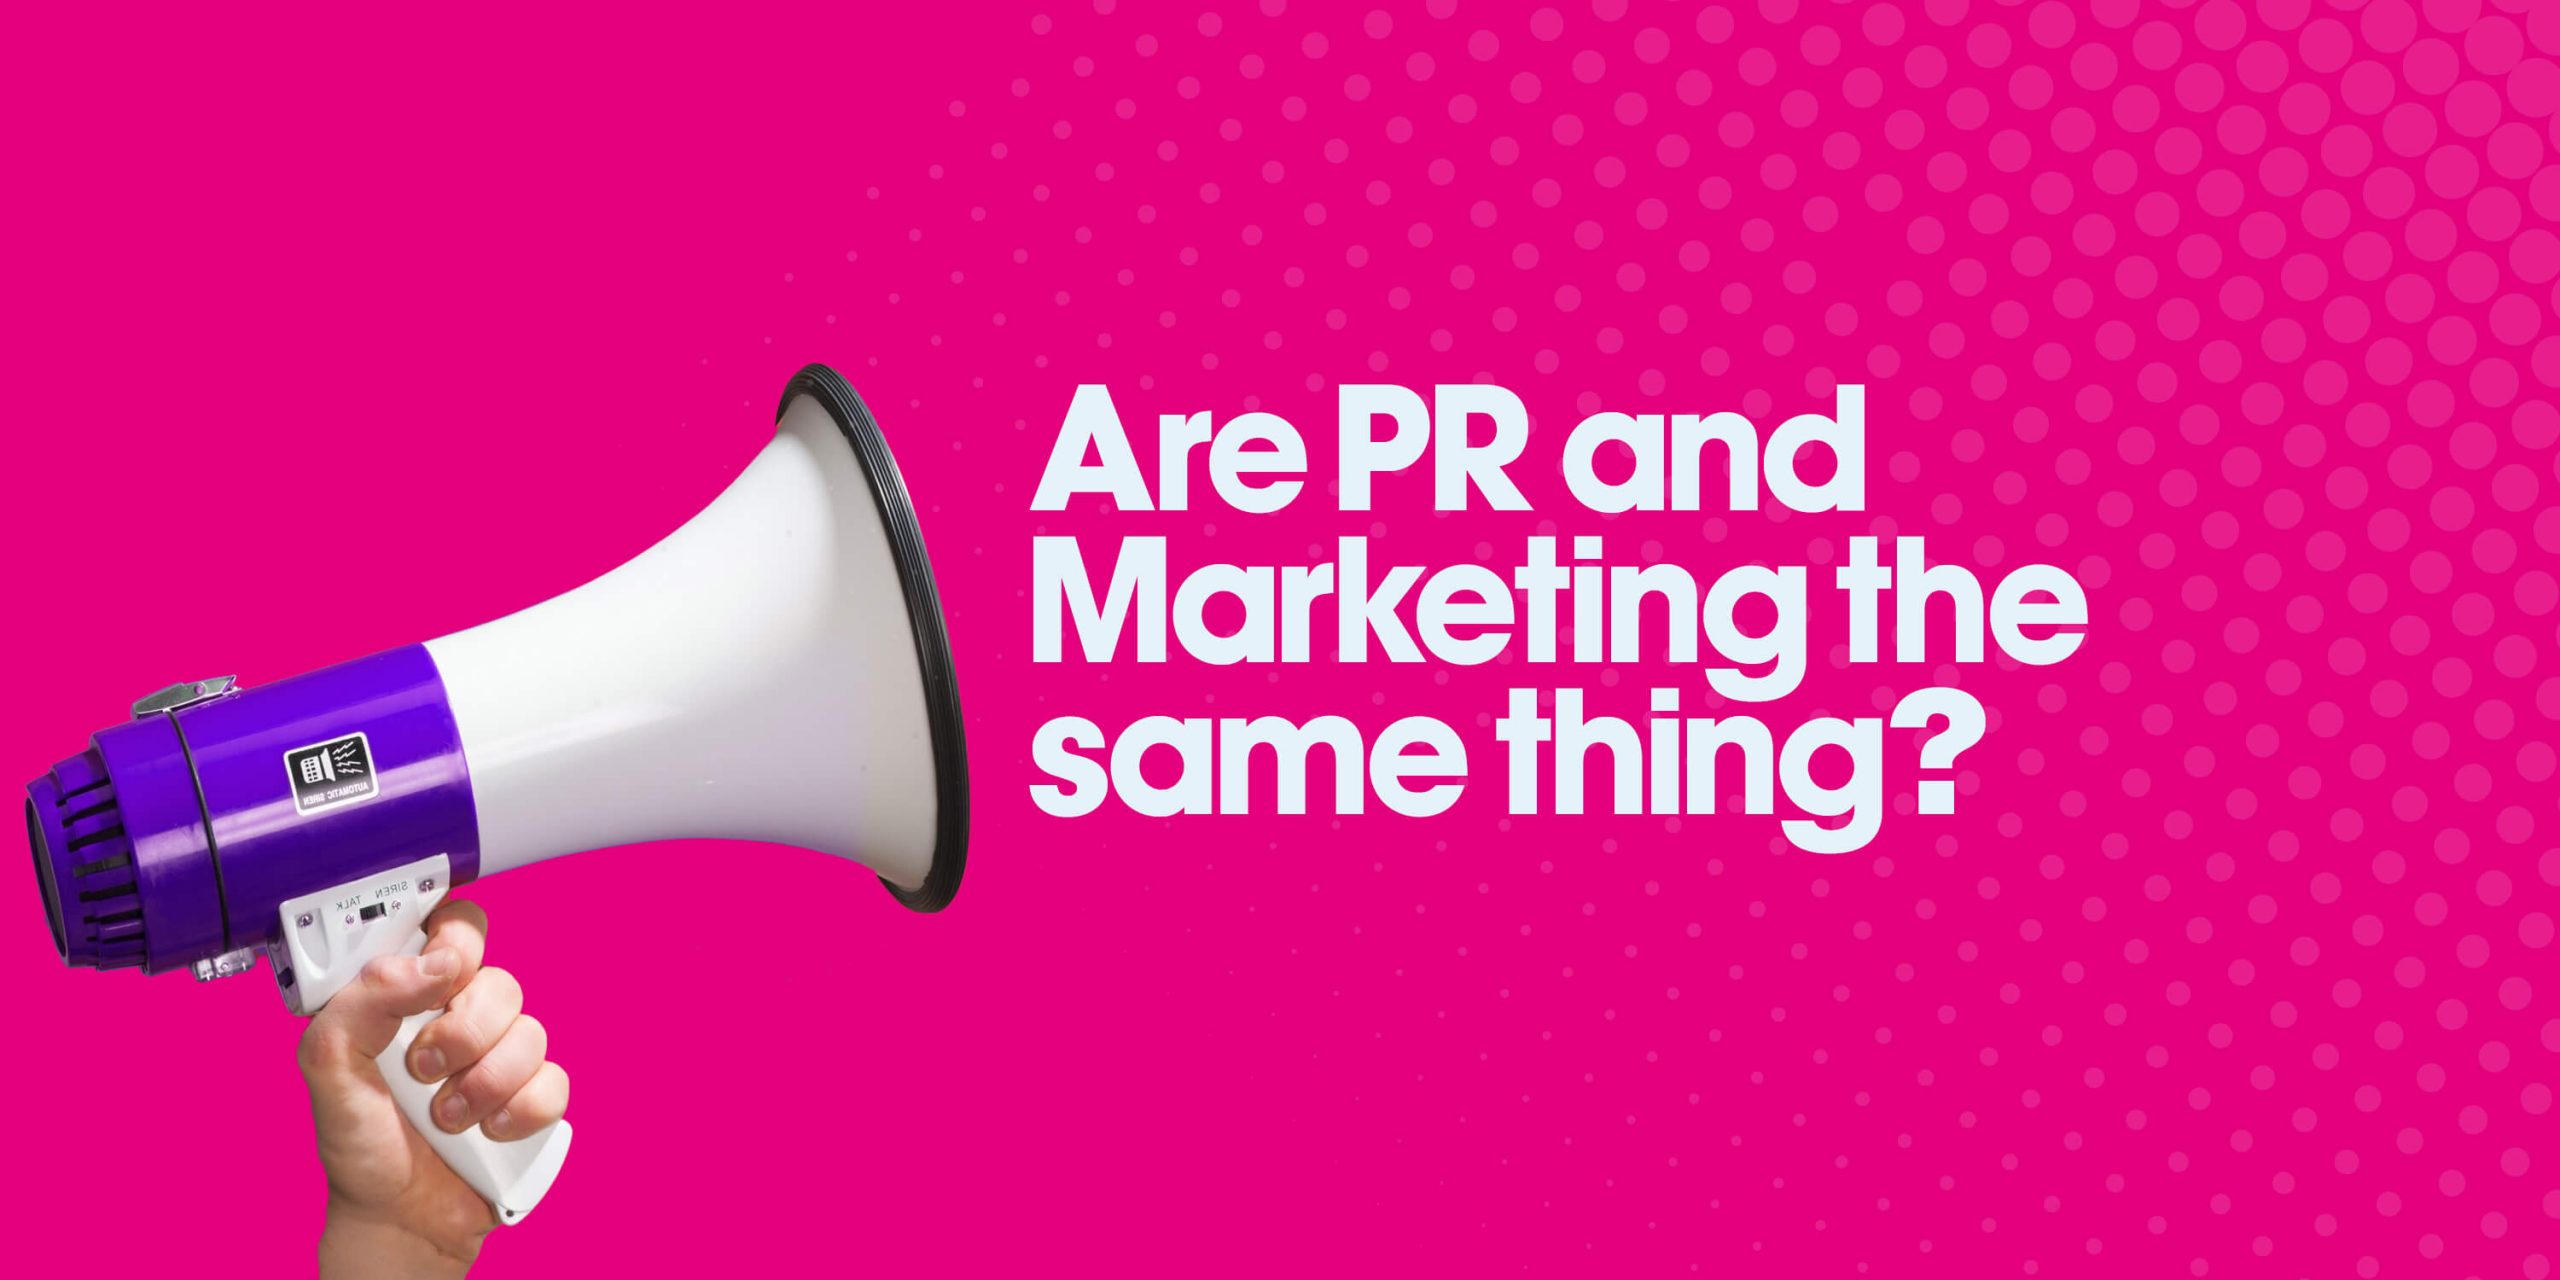 Are PR and Marketing the same thing? image